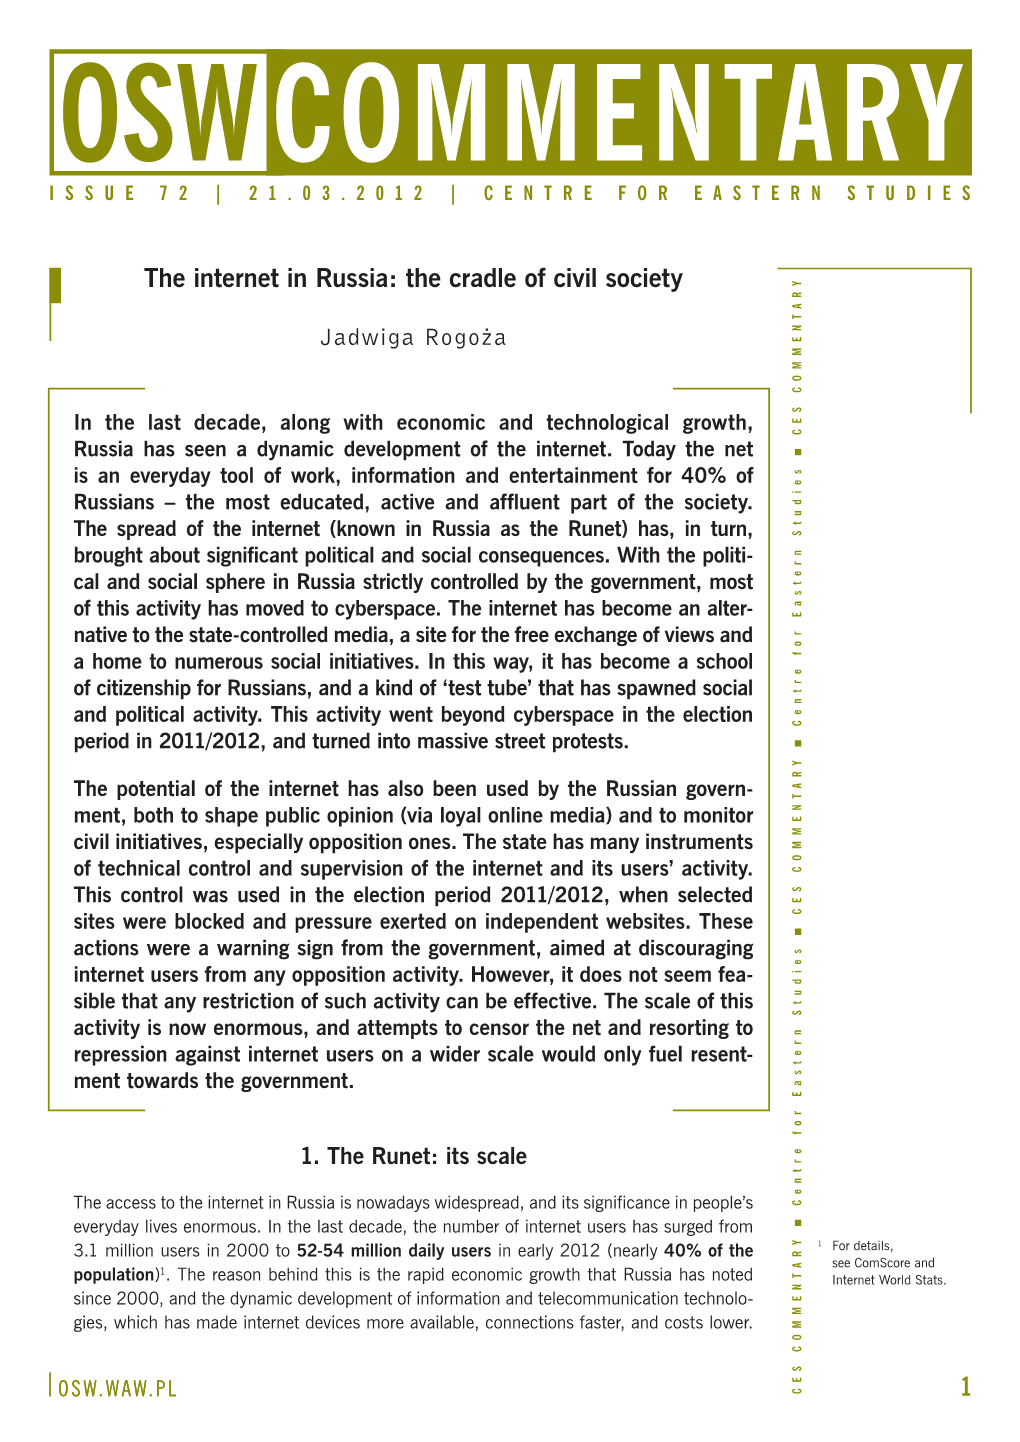 The Internet in Russia: the Cradle of Civil Society